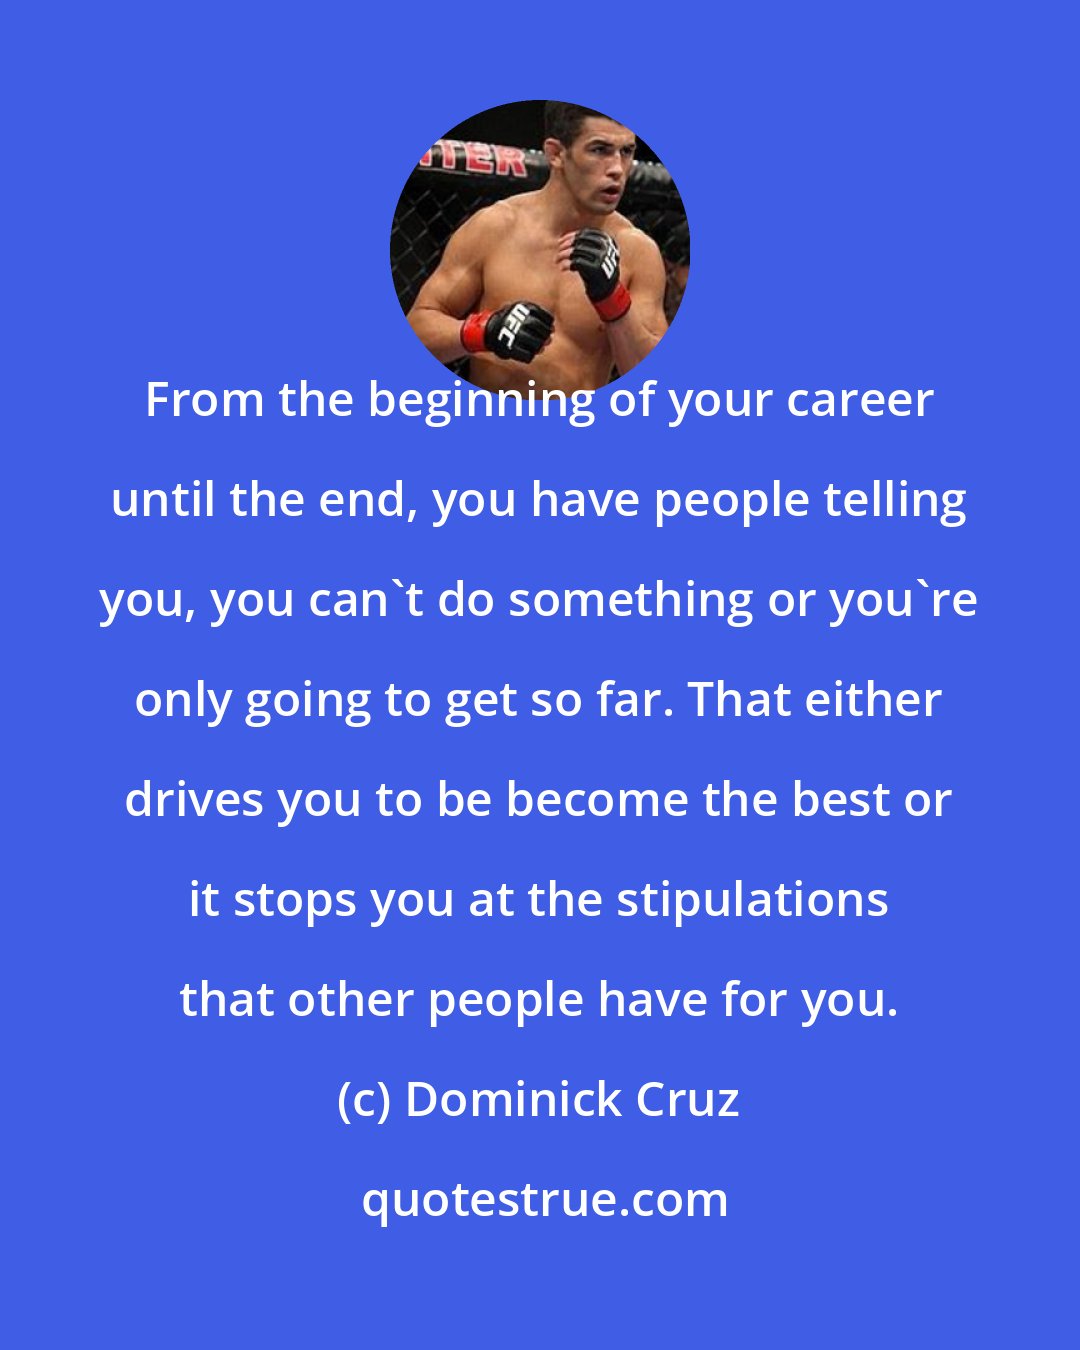 Dominick Cruz: From the beginning of your career until the end, you have people telling you, you can't do something or you're only going to get so far. That either drives you to be become the best or it stops you at the stipulations that other people have for you.